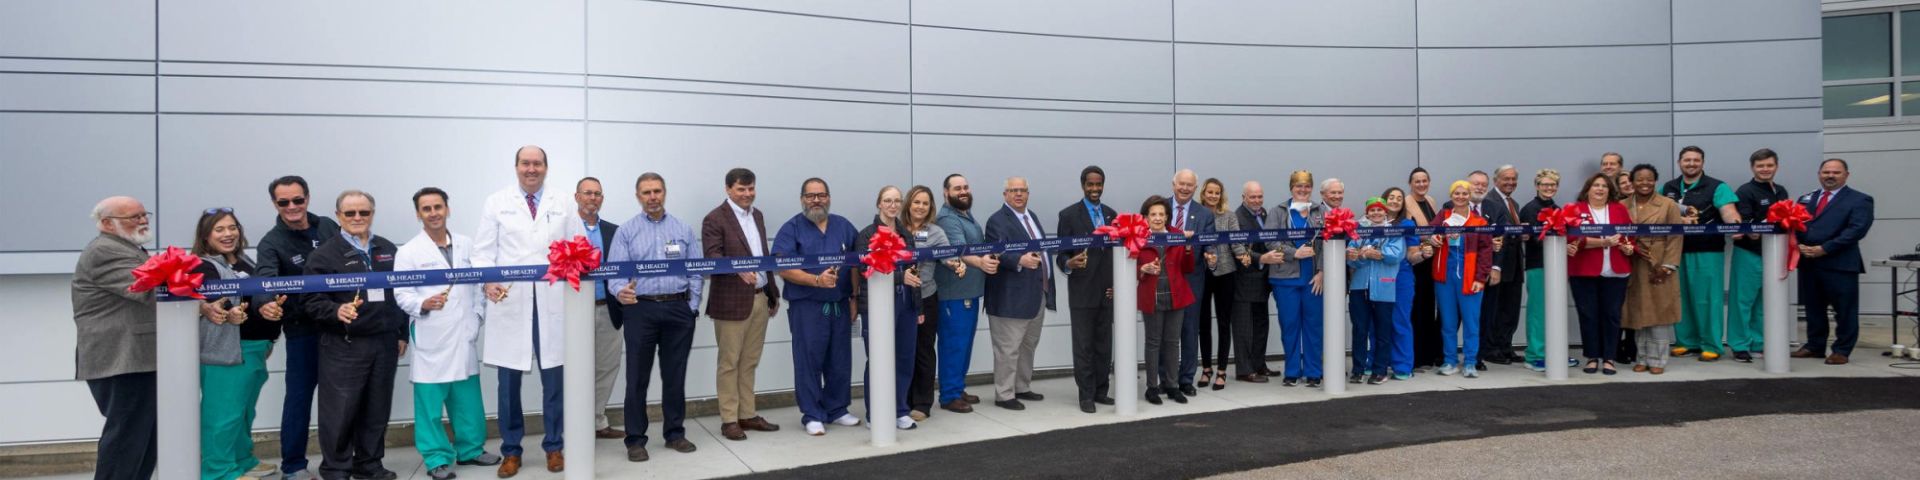 USA Health unveils new high-tech operating rooms at University Hospital